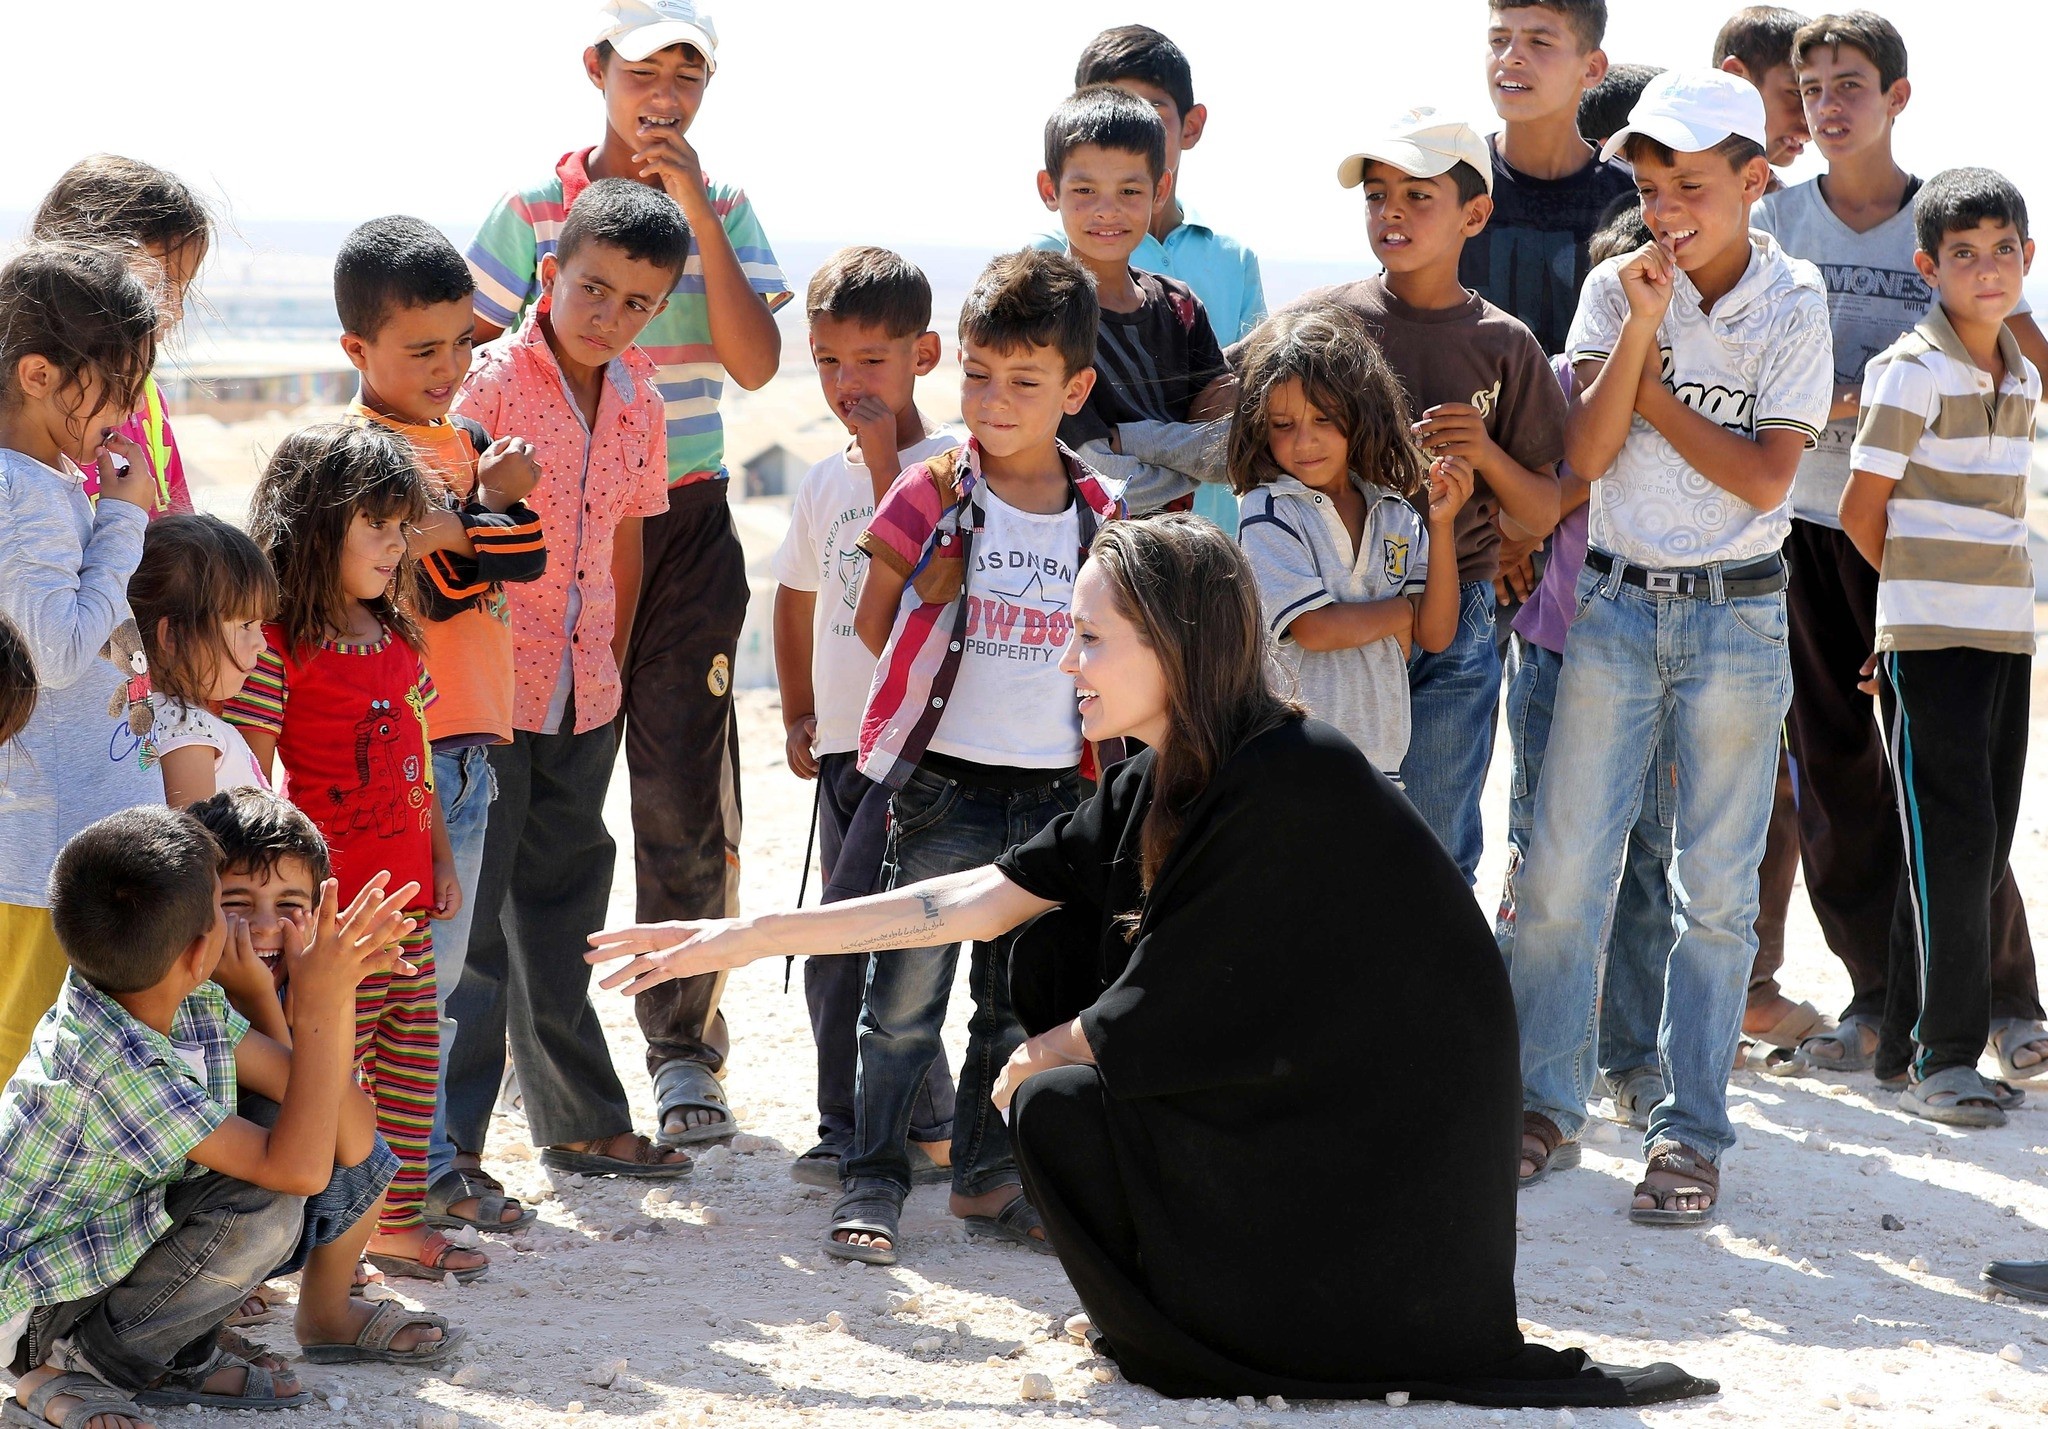 US actress and UNHCR special envoy Angelina Jolie (C) talks to children during a visit to a Syrian refugee camp in Azraq in northern Jordan, on September 9, 2016. (AFP PHOTO)